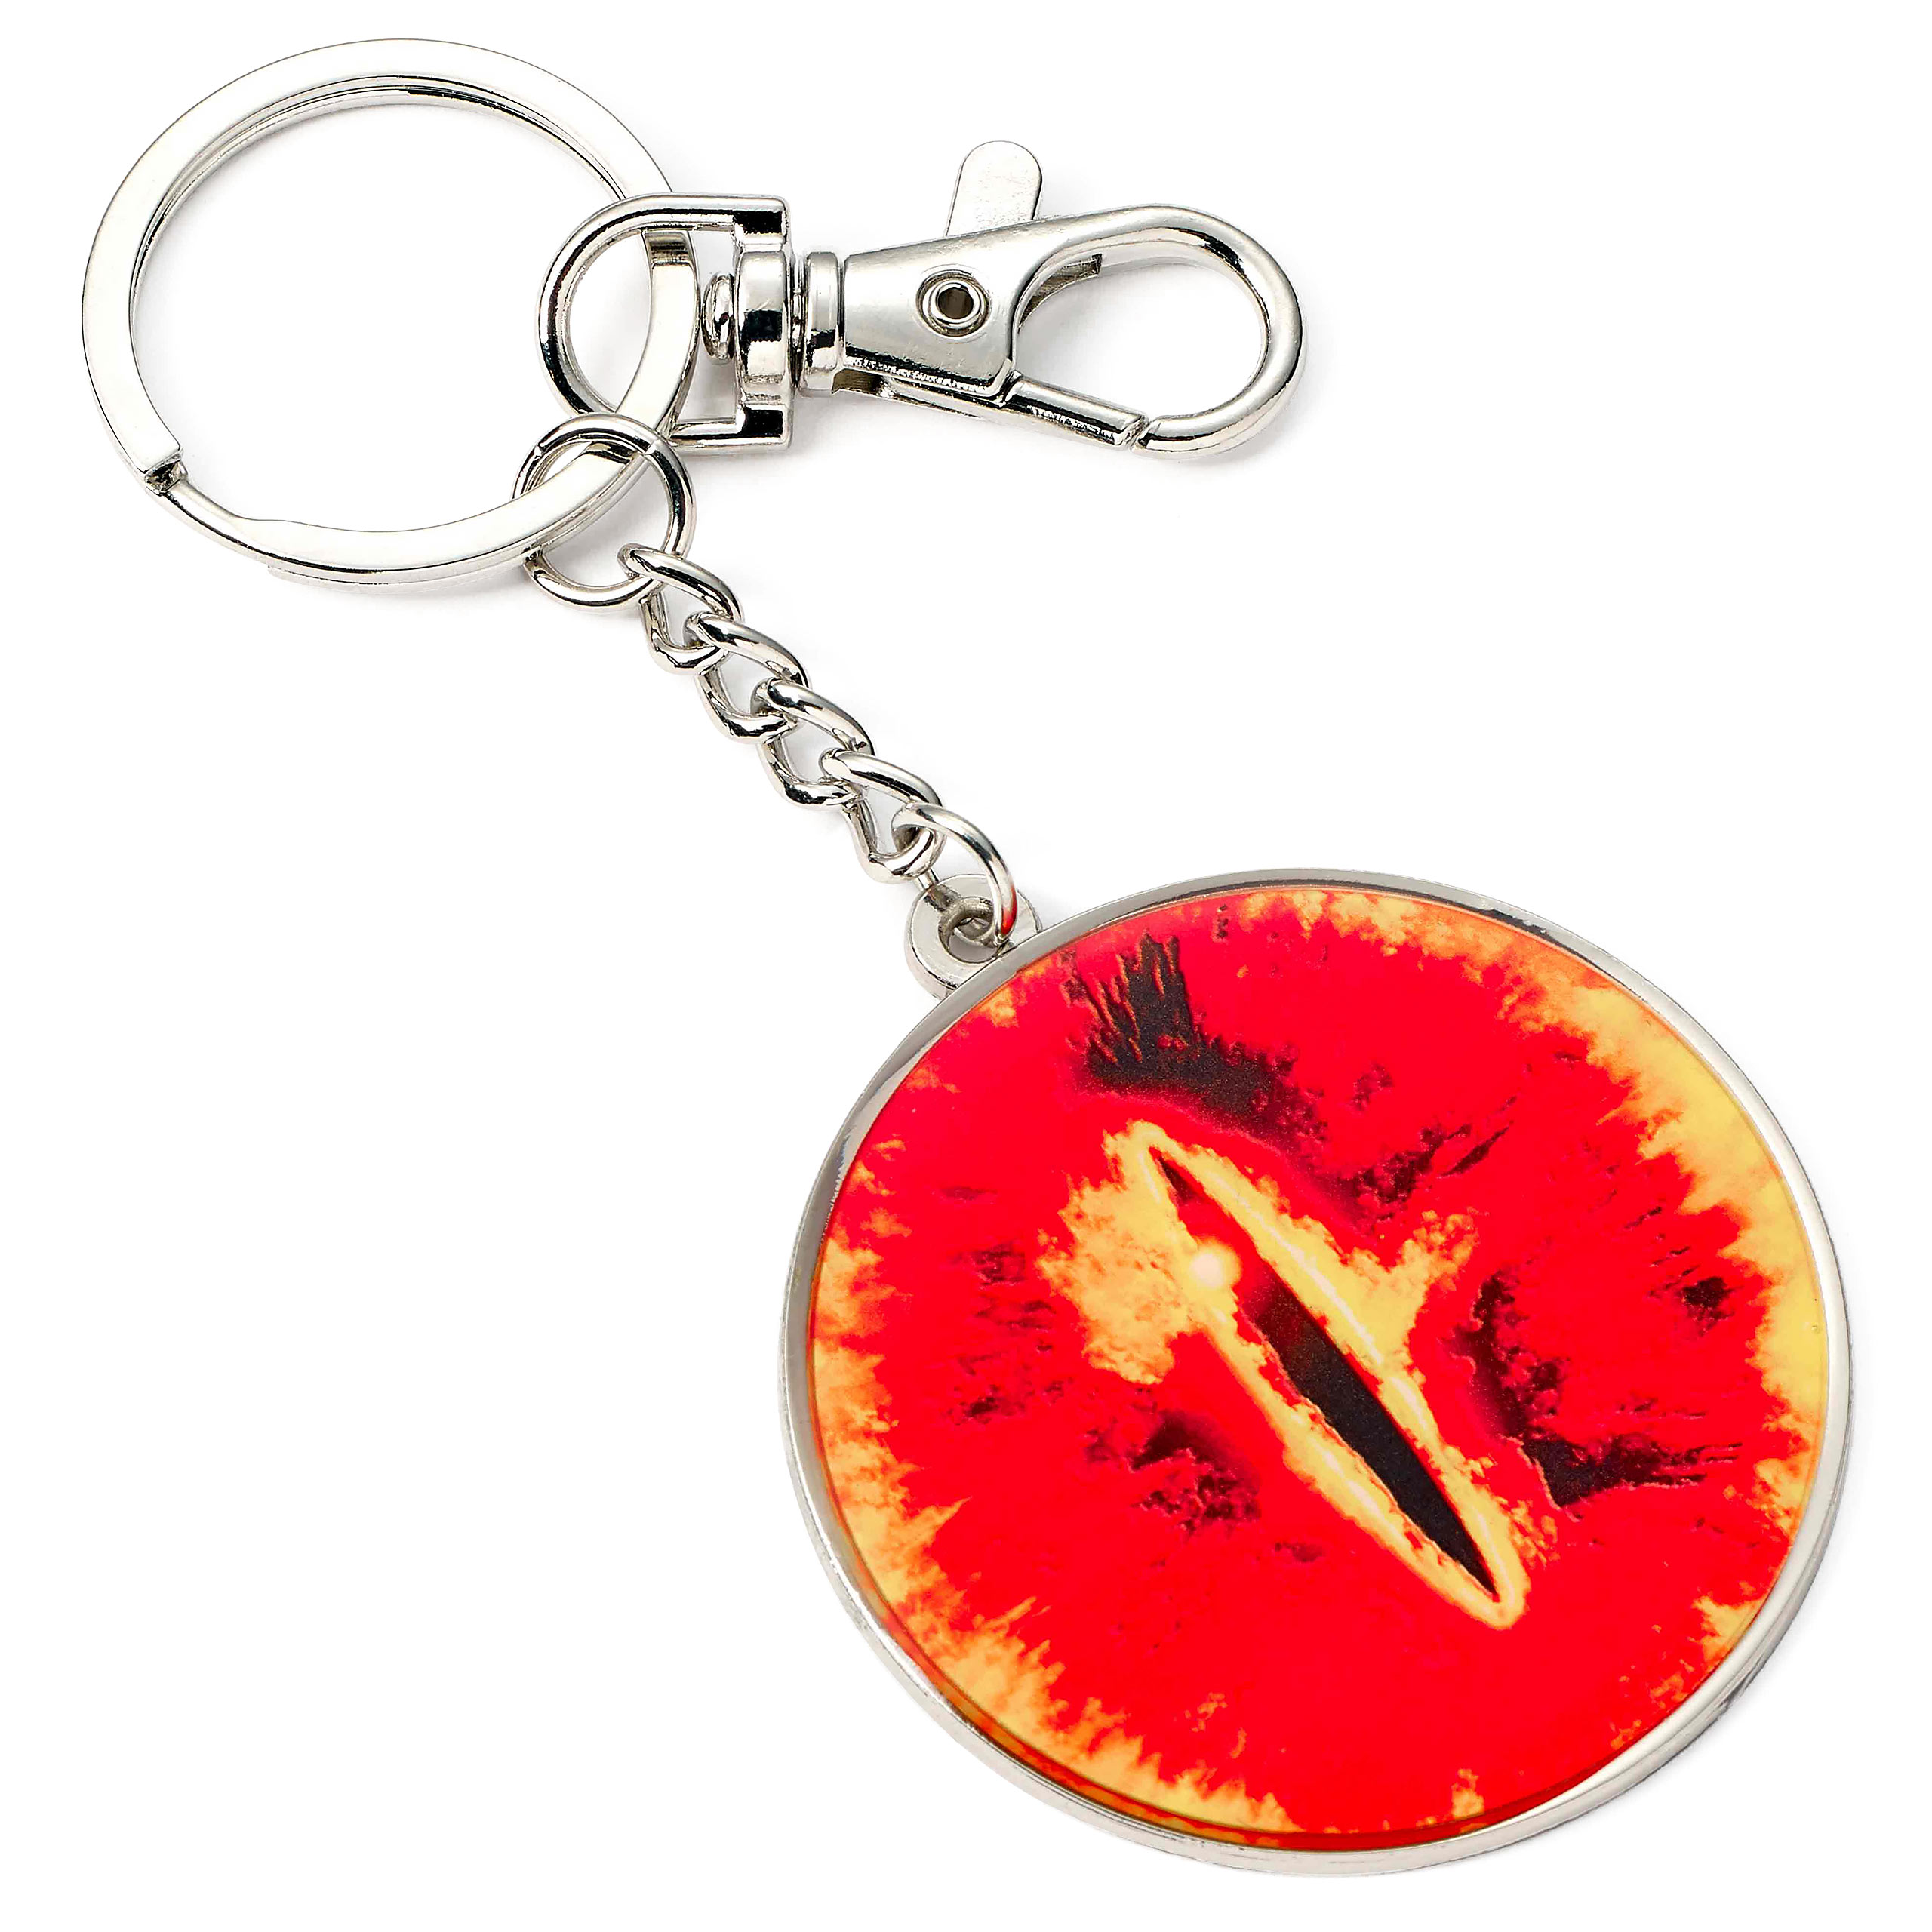 Sauron Keychain - Lord of the Rings